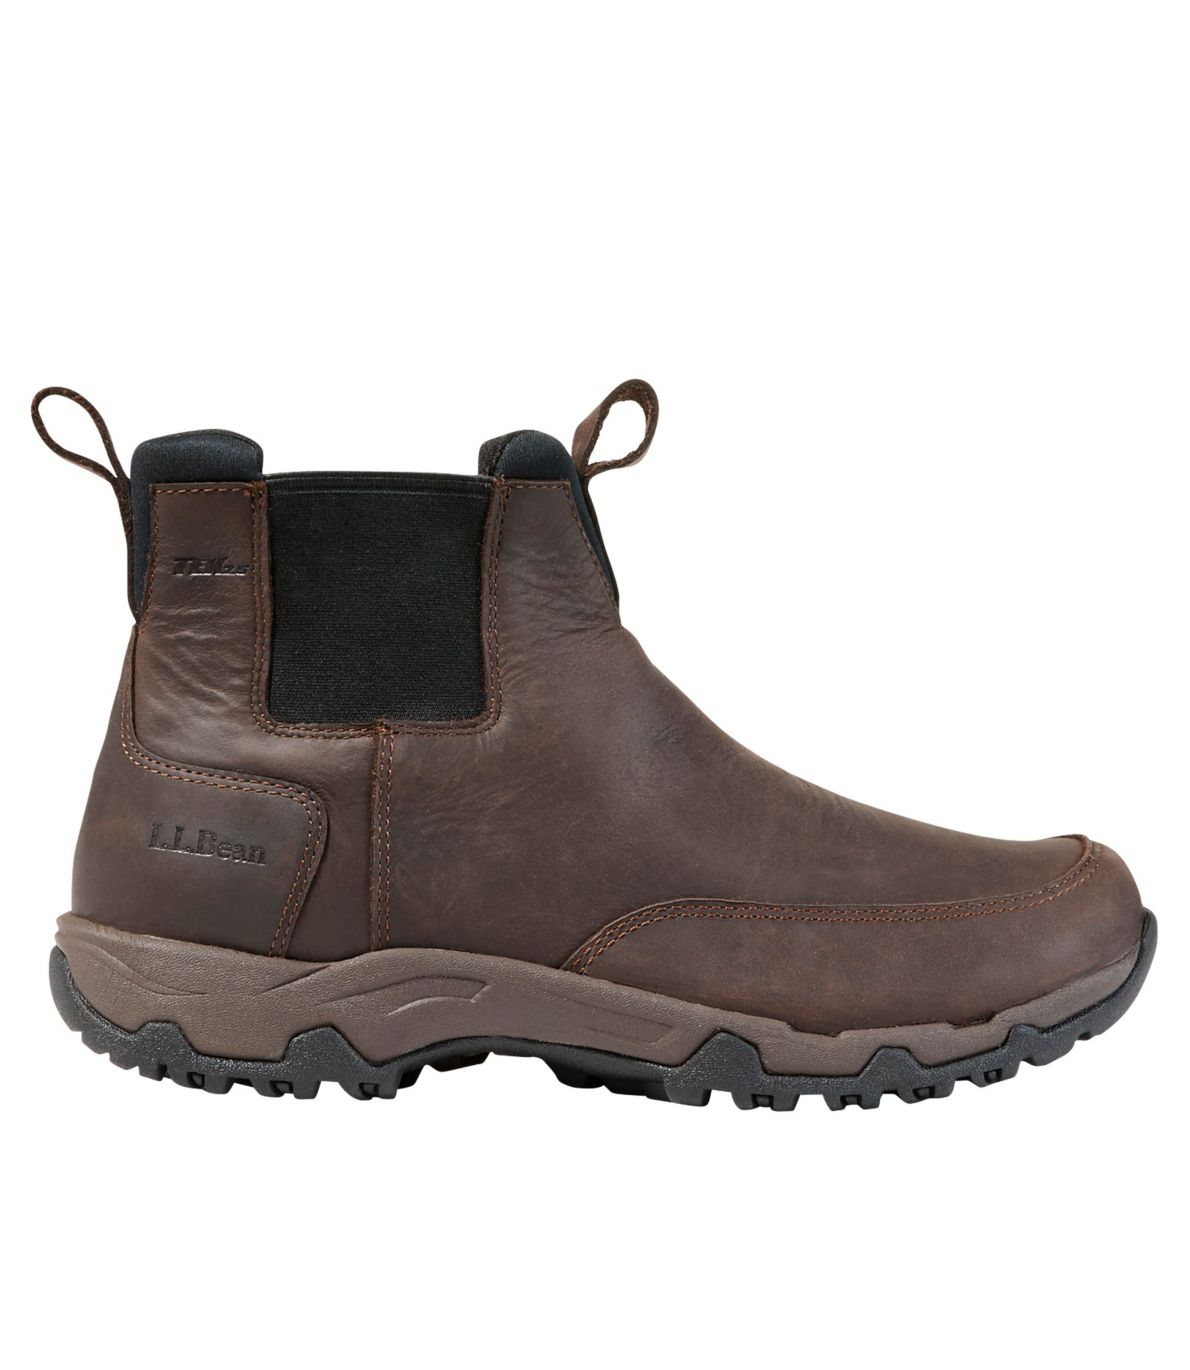 Men's Newington Slip-On Boots, Waterproof Insulated at L.L. Bean